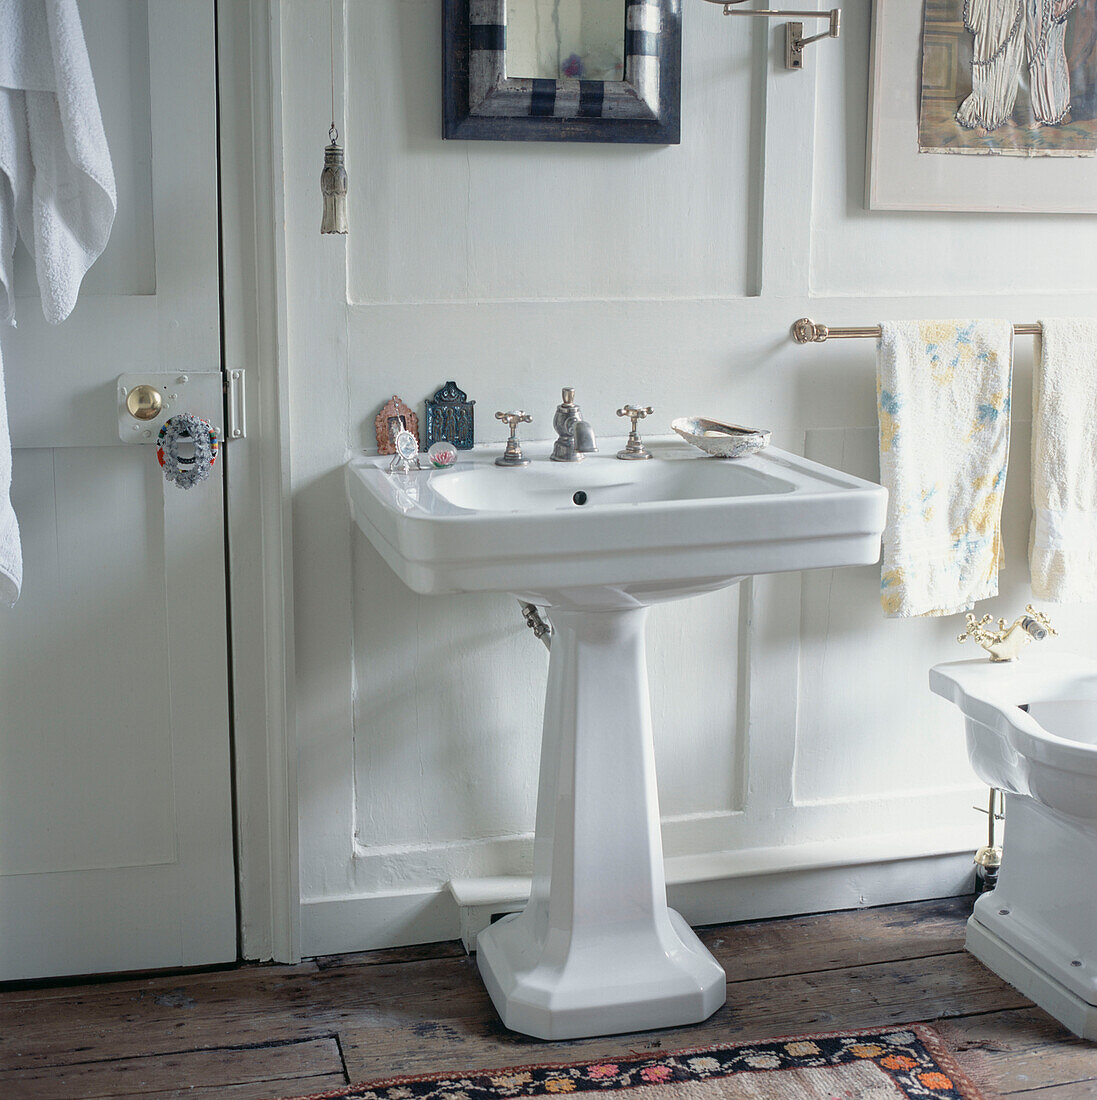 White country style wood panelled bathroom with vintage sink